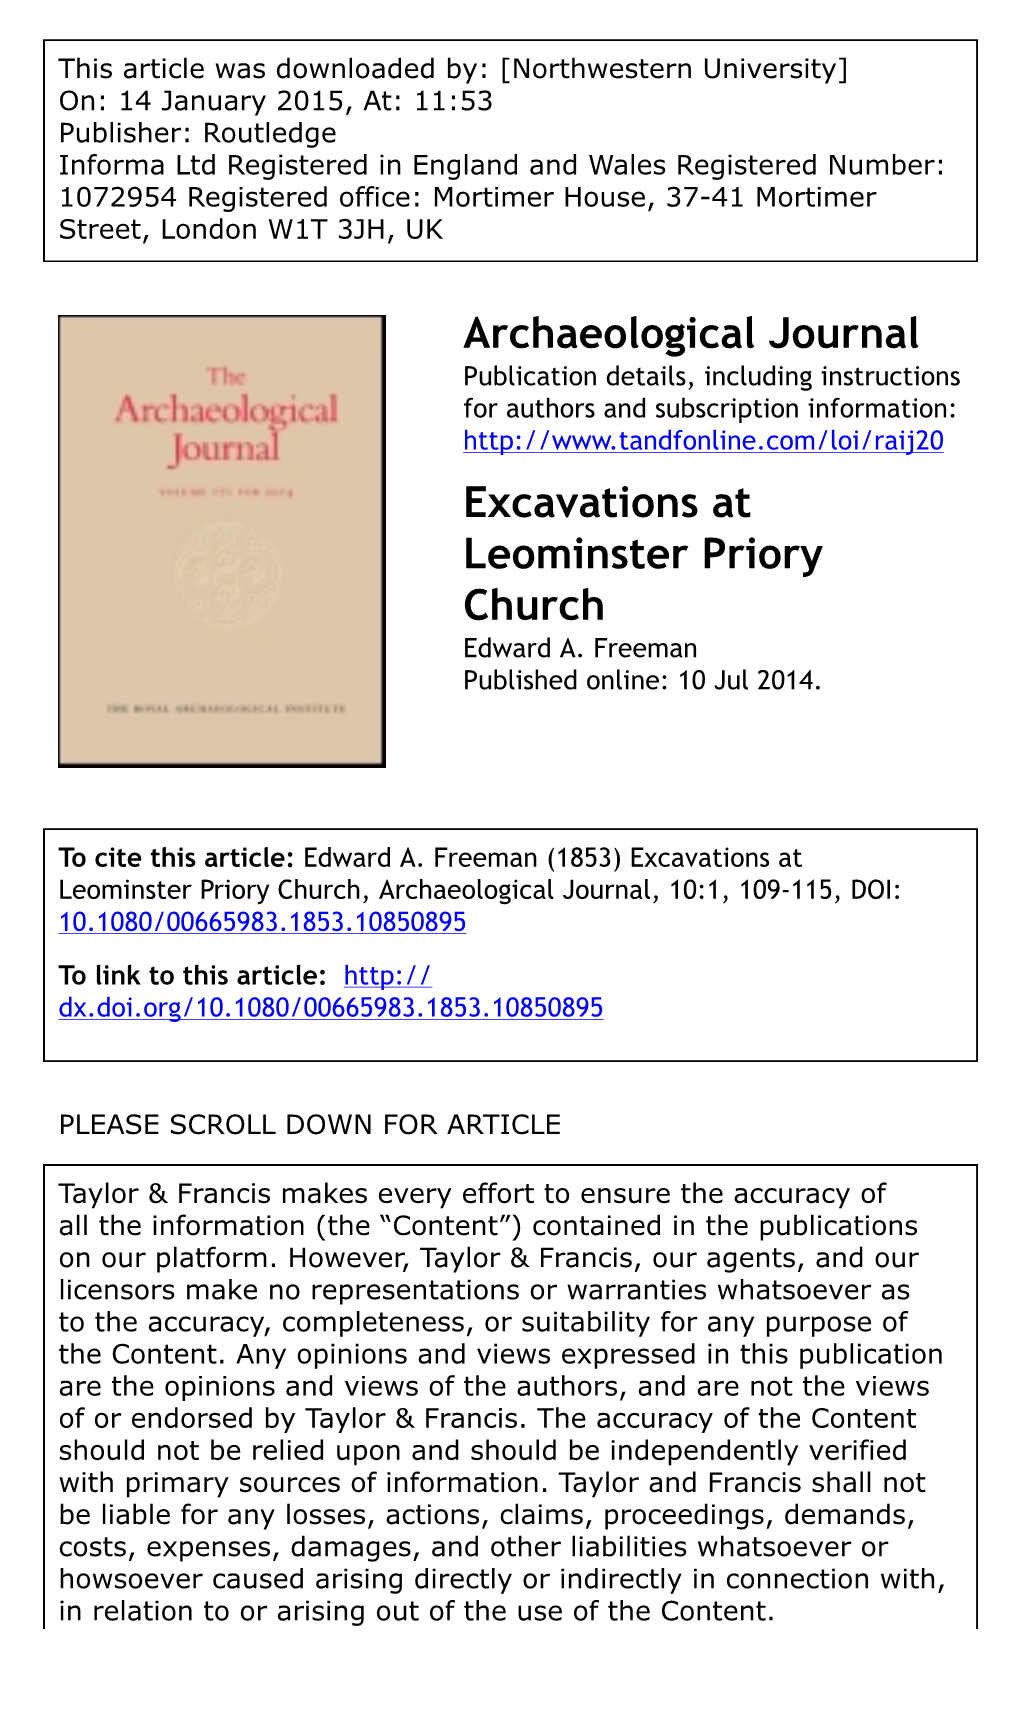 Archaeological Journal Excavations at Leominster Priory Church